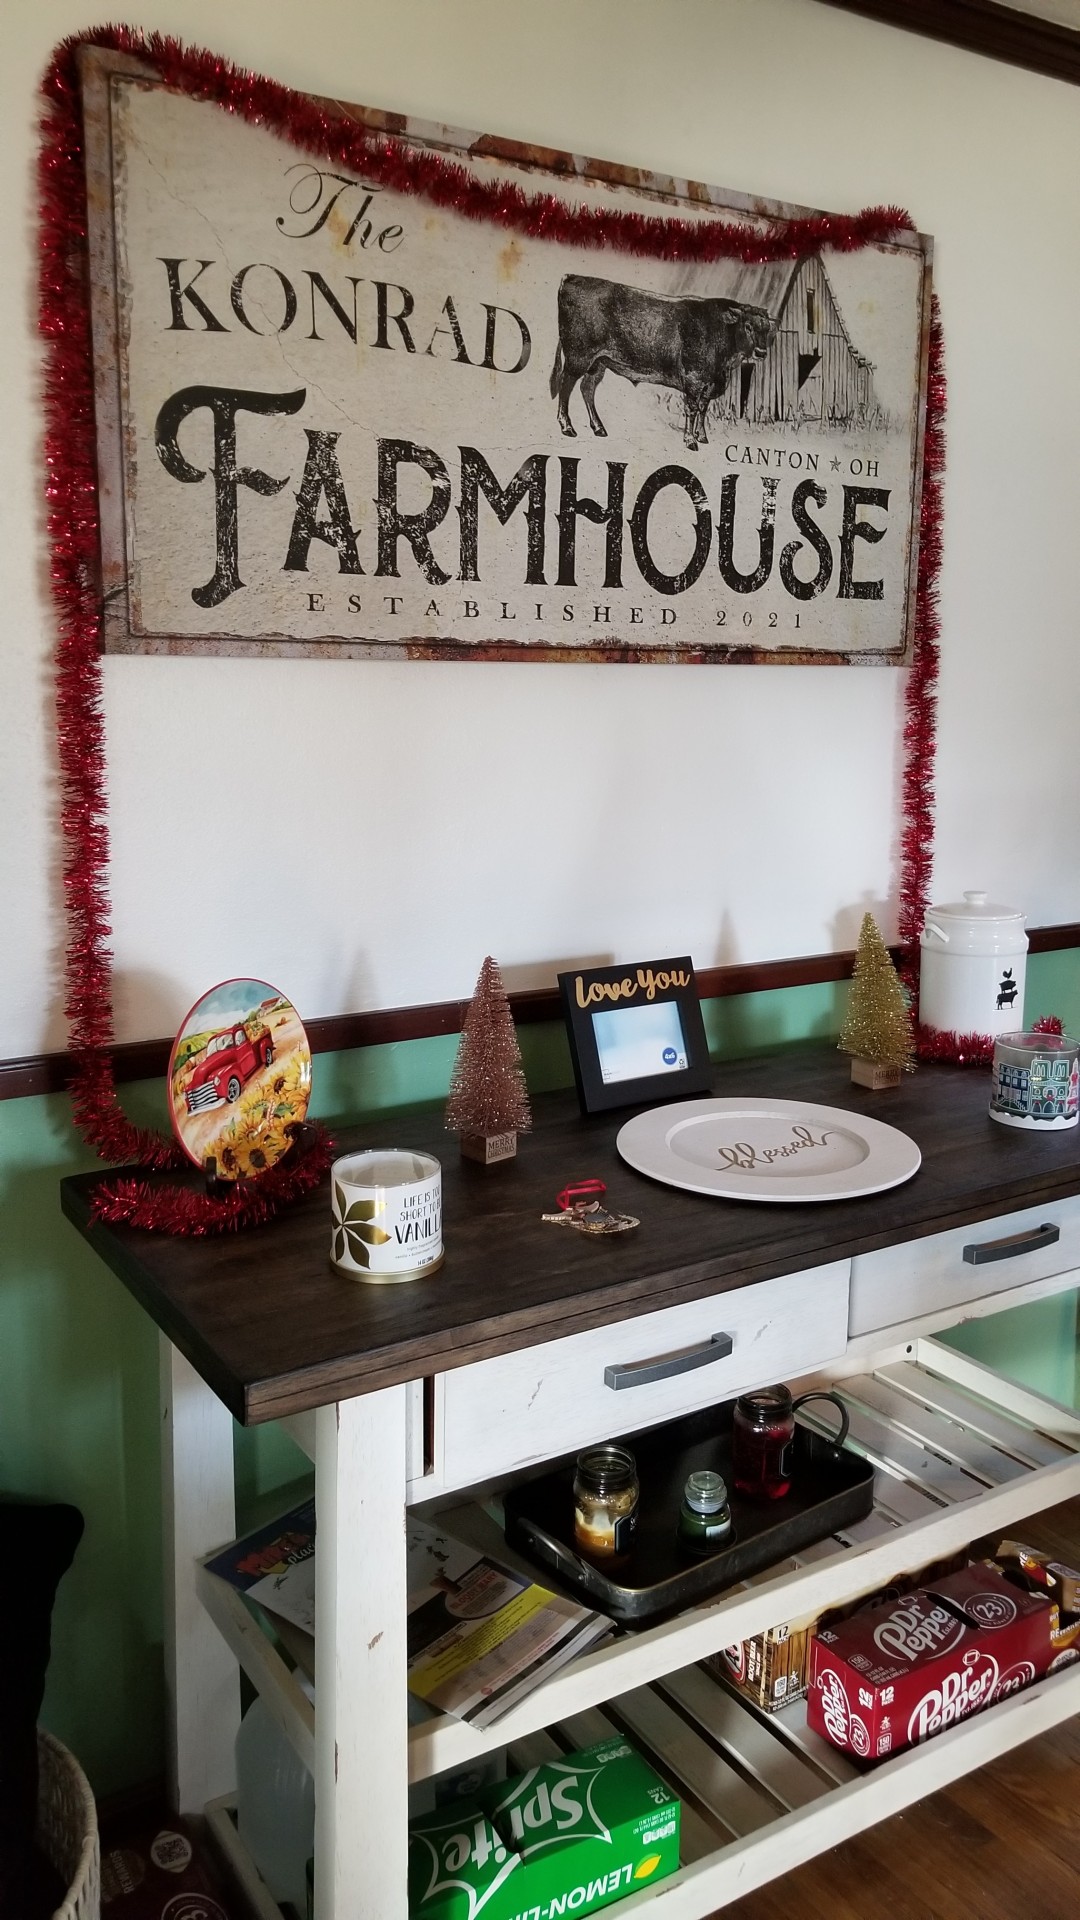 katiiie-lynn:Finally finished decorating the house for Christmas today! 🥰🎄🎅🤶🎁@mossyoakmaster  As always looking amazing my love! We rocked it so far!! 